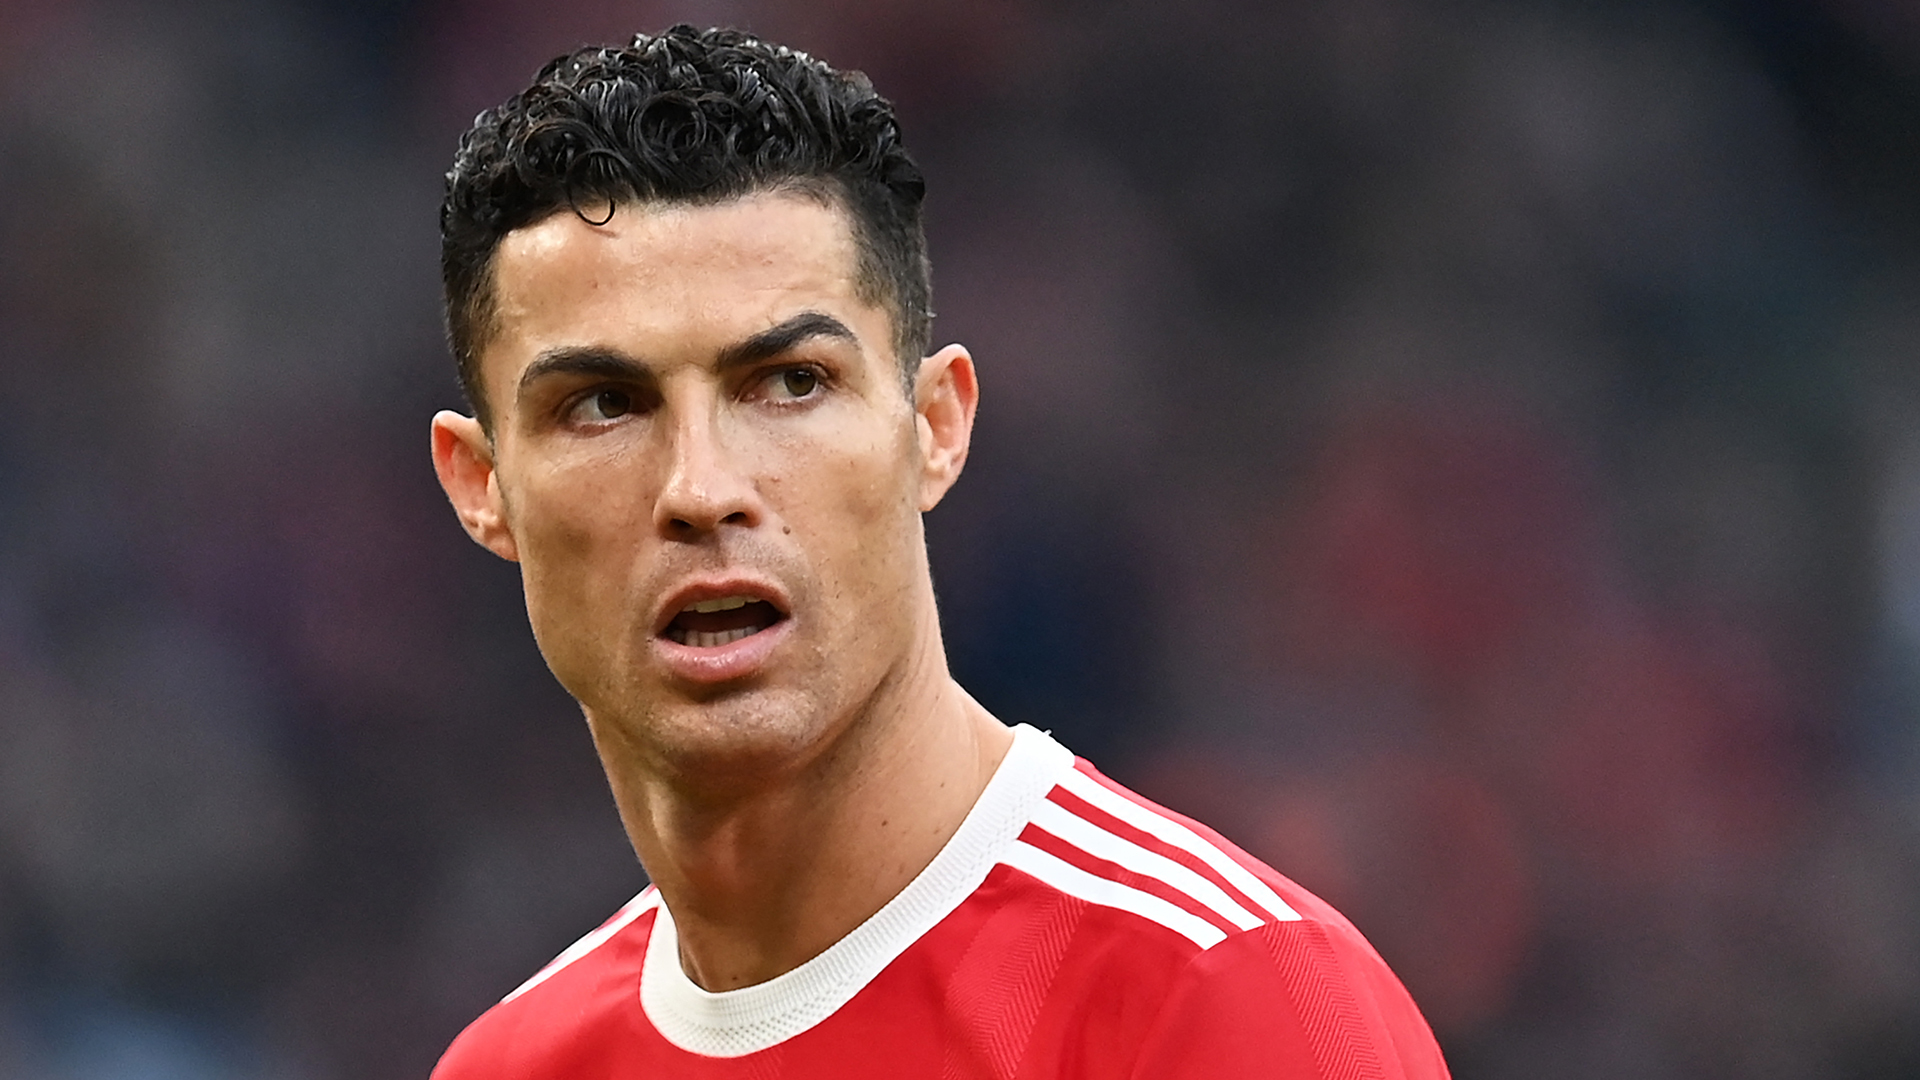 Man Utd forward Ronaldo aims to continue playing until he's at least 42. Goal.com US